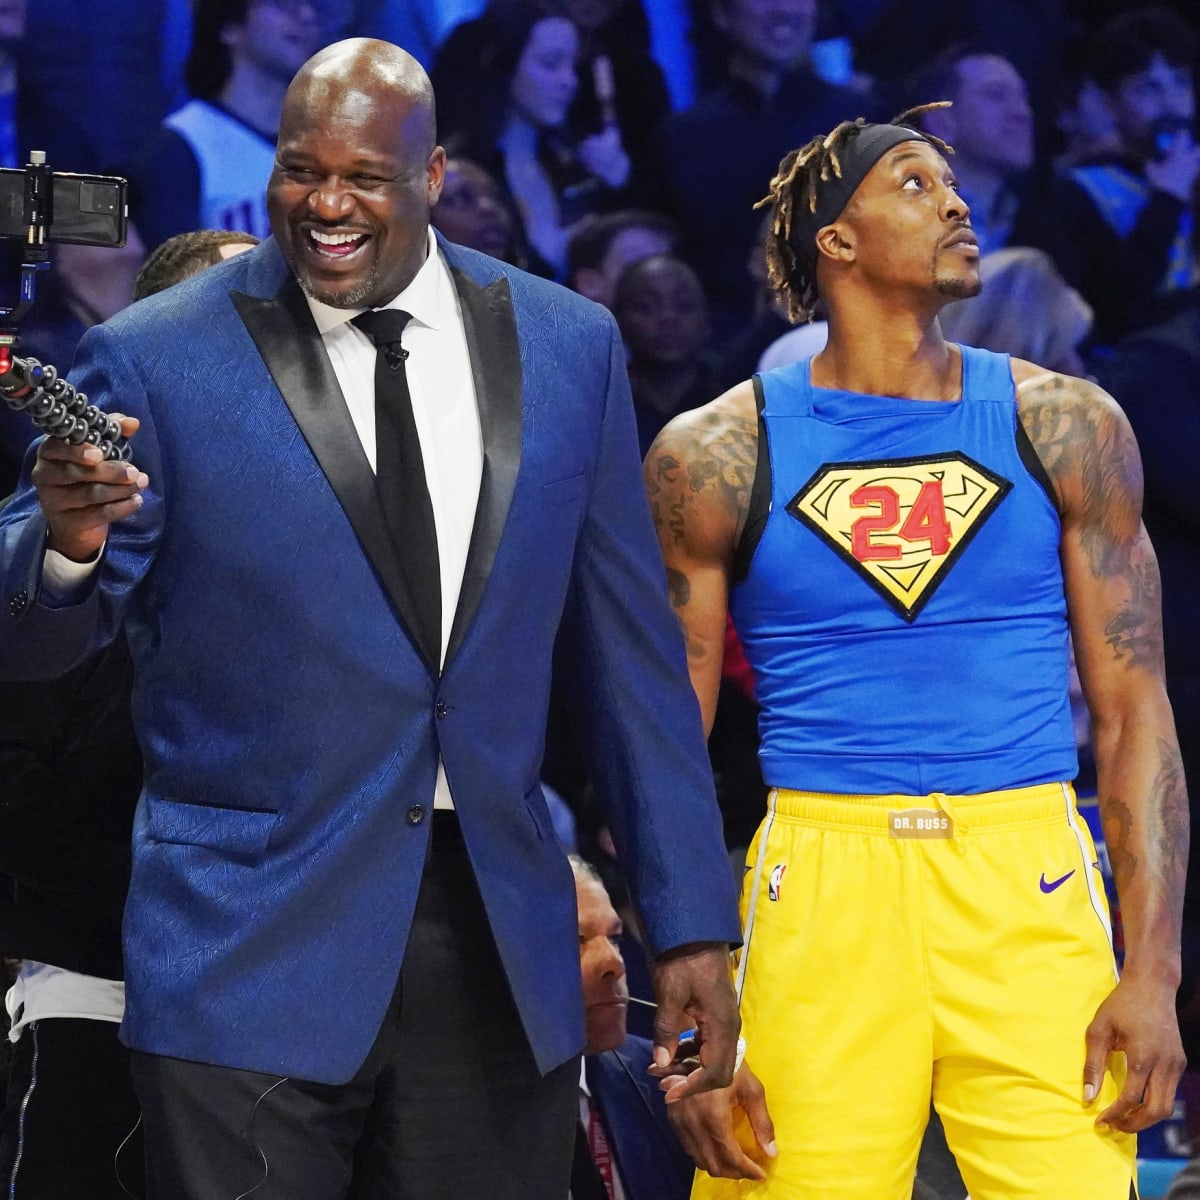 Miami Heat: After all these years, Shaq and Kobe still beefing